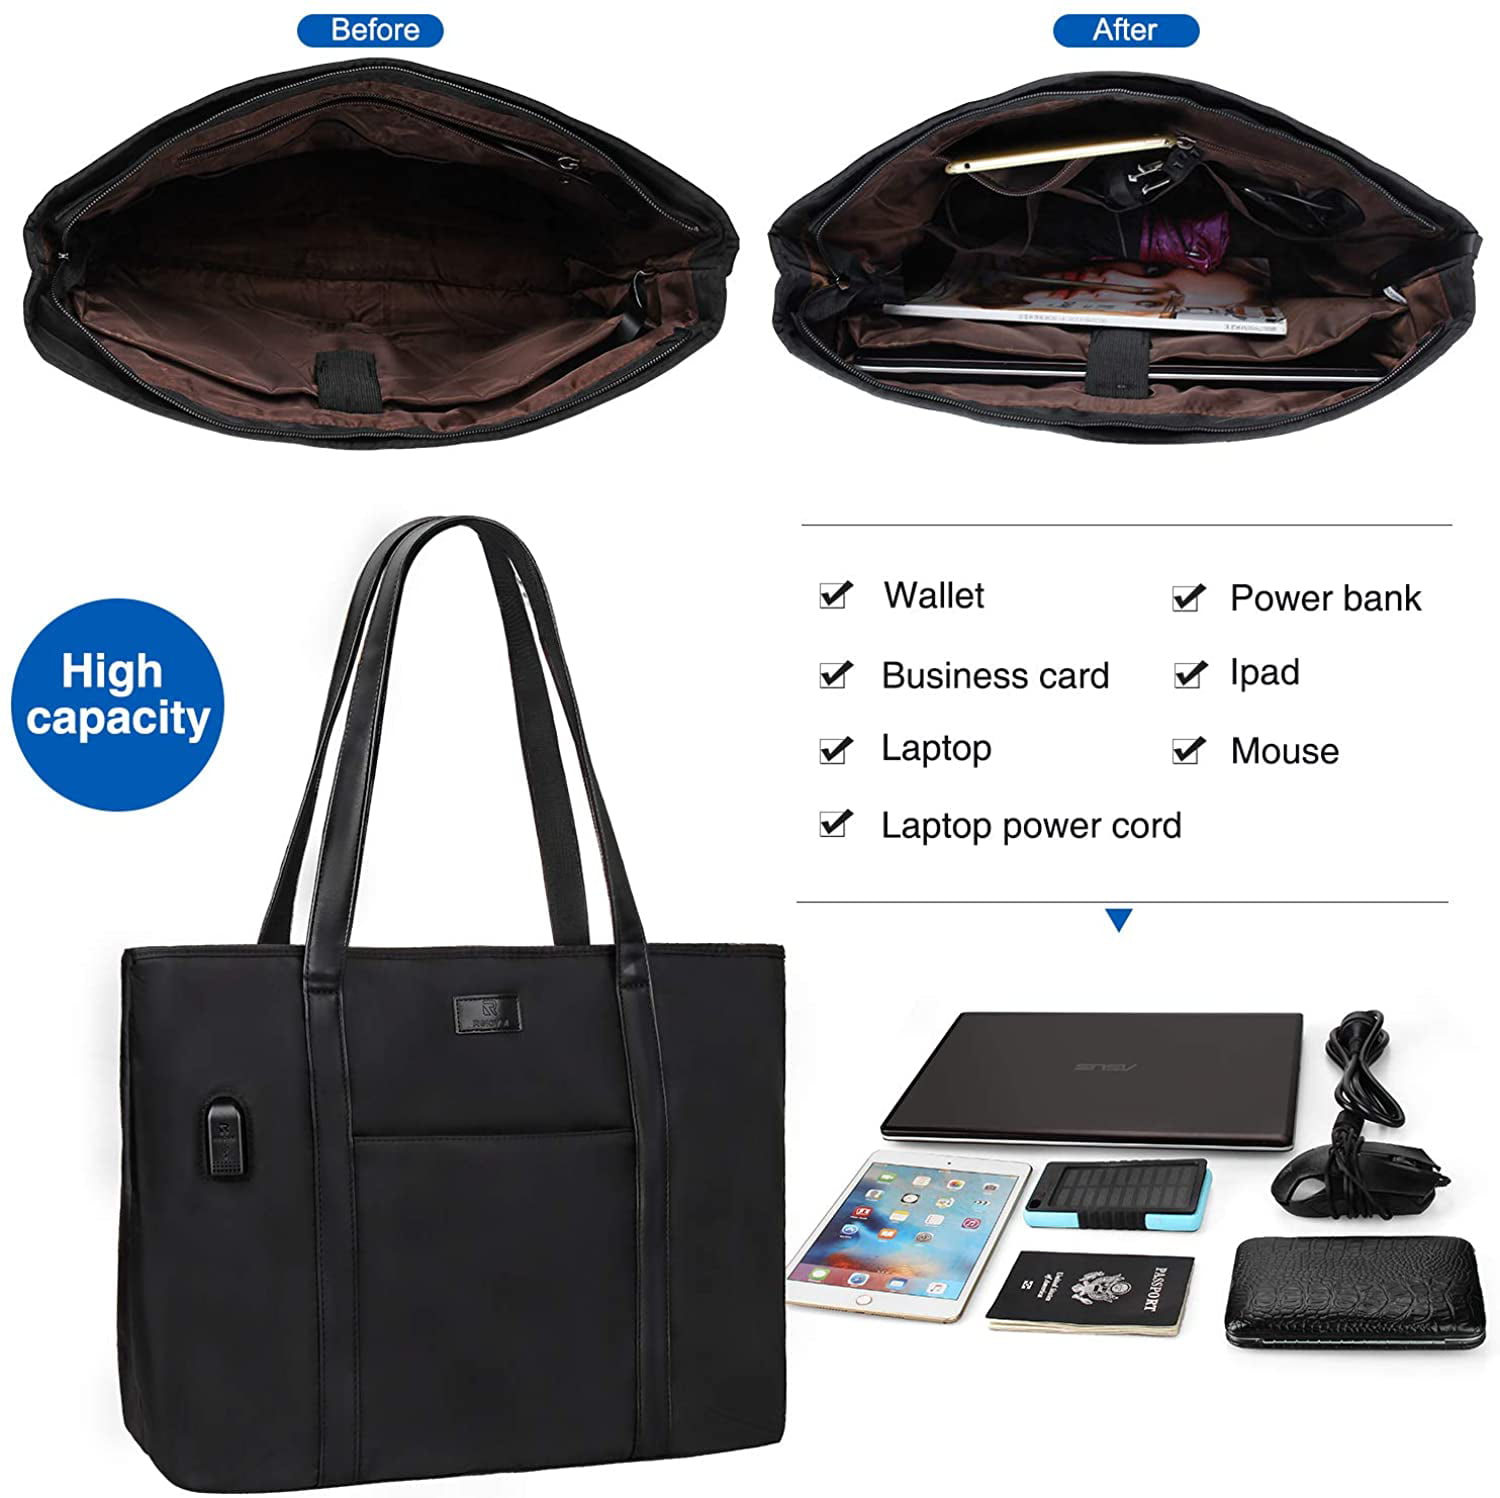 Laptop Tote Bag for Men and Women Business Work Teacher School USB Bag Briefcase Travel Fits 15.6 inch Laptop 